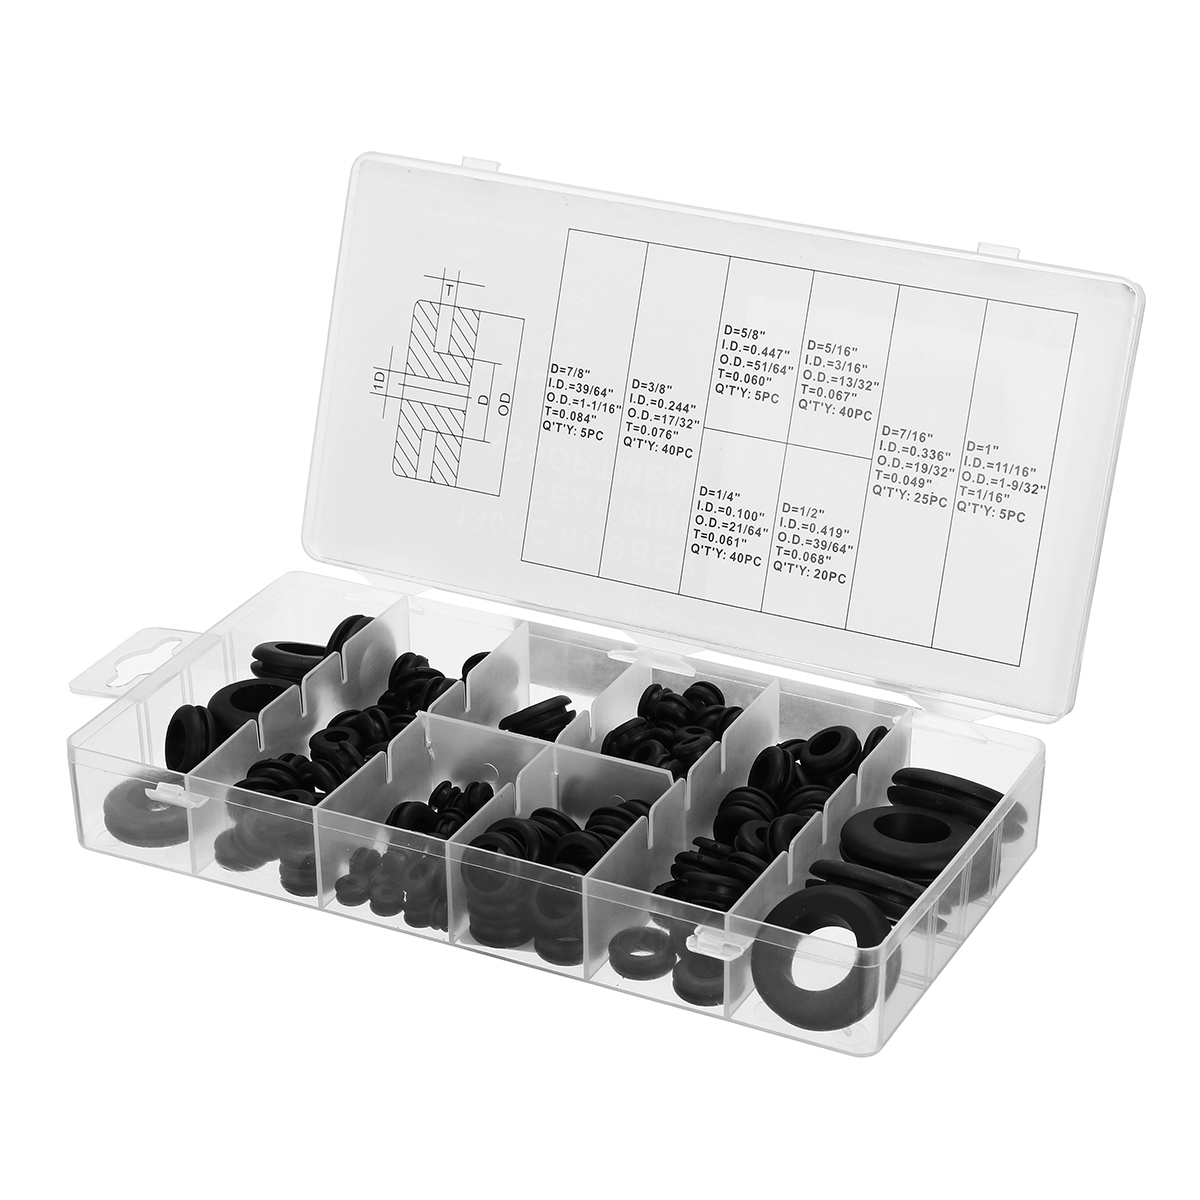 180 PCS Black Rubber Grommet Firewall Hole Plug Set Car Electrical Wire Gasket Ring Grommets Assorted Kit with Box OFNMY Rubber Grommet Assortment Kit 8 Sizes